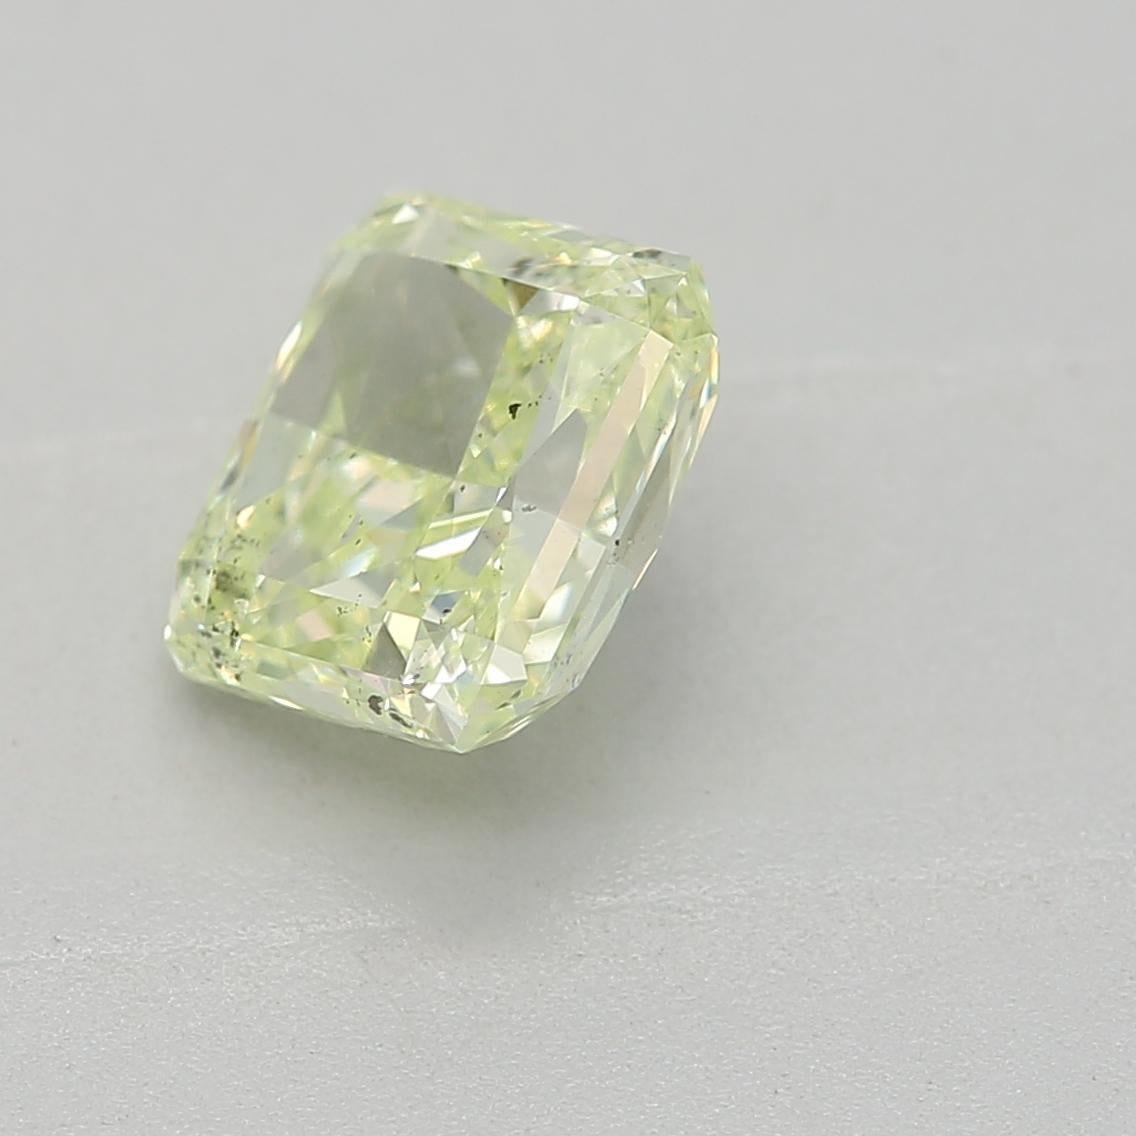 *100% NATURAL FANCY COLOUR DIAMOND*

✪ Diamond Details ✪

➛ Shape: Radiant
➛ Colour Grade: Fancy Yellow Green
➛ Carat: 1.02
➛ Clarity: SI2
➛ GIA Certified 

^FEATURES OF THE DIAMOND^












Also, our GIA certified diamond is a diamond that has